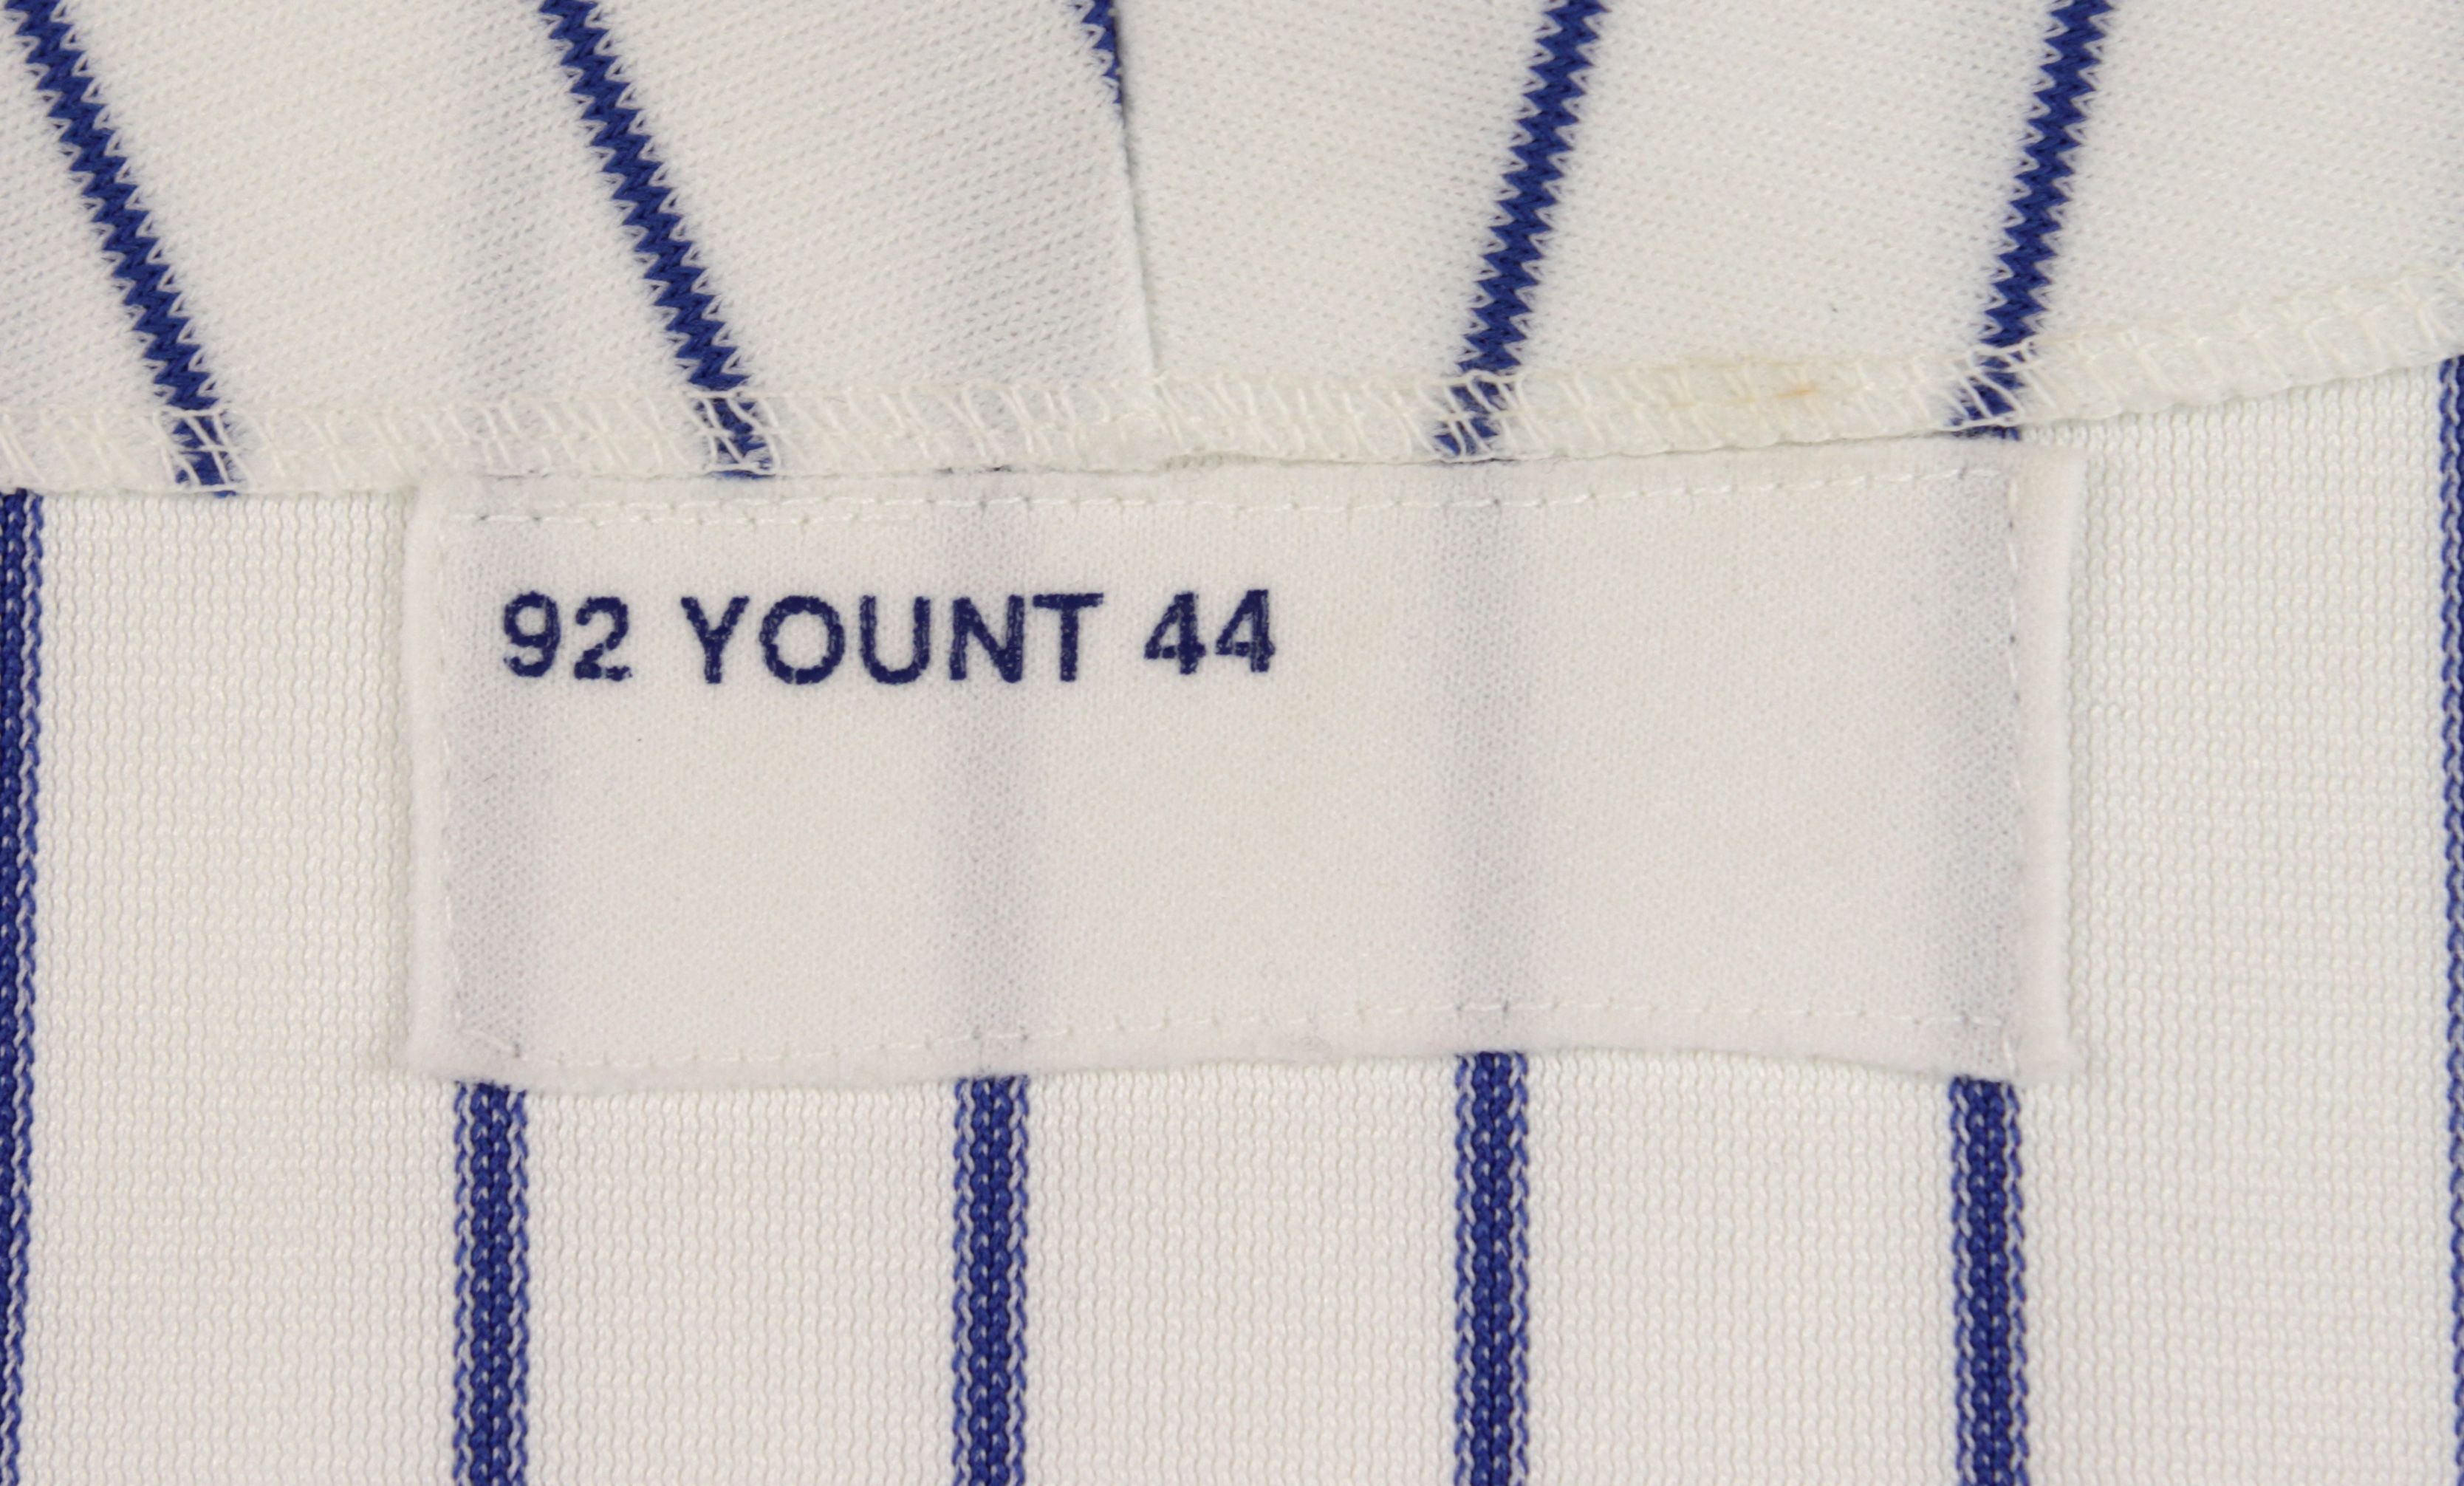 Lot Detail - 1992 ROBIN YOUNT MILWAUKEE BREWERS GAME WORN HOME JERSEY